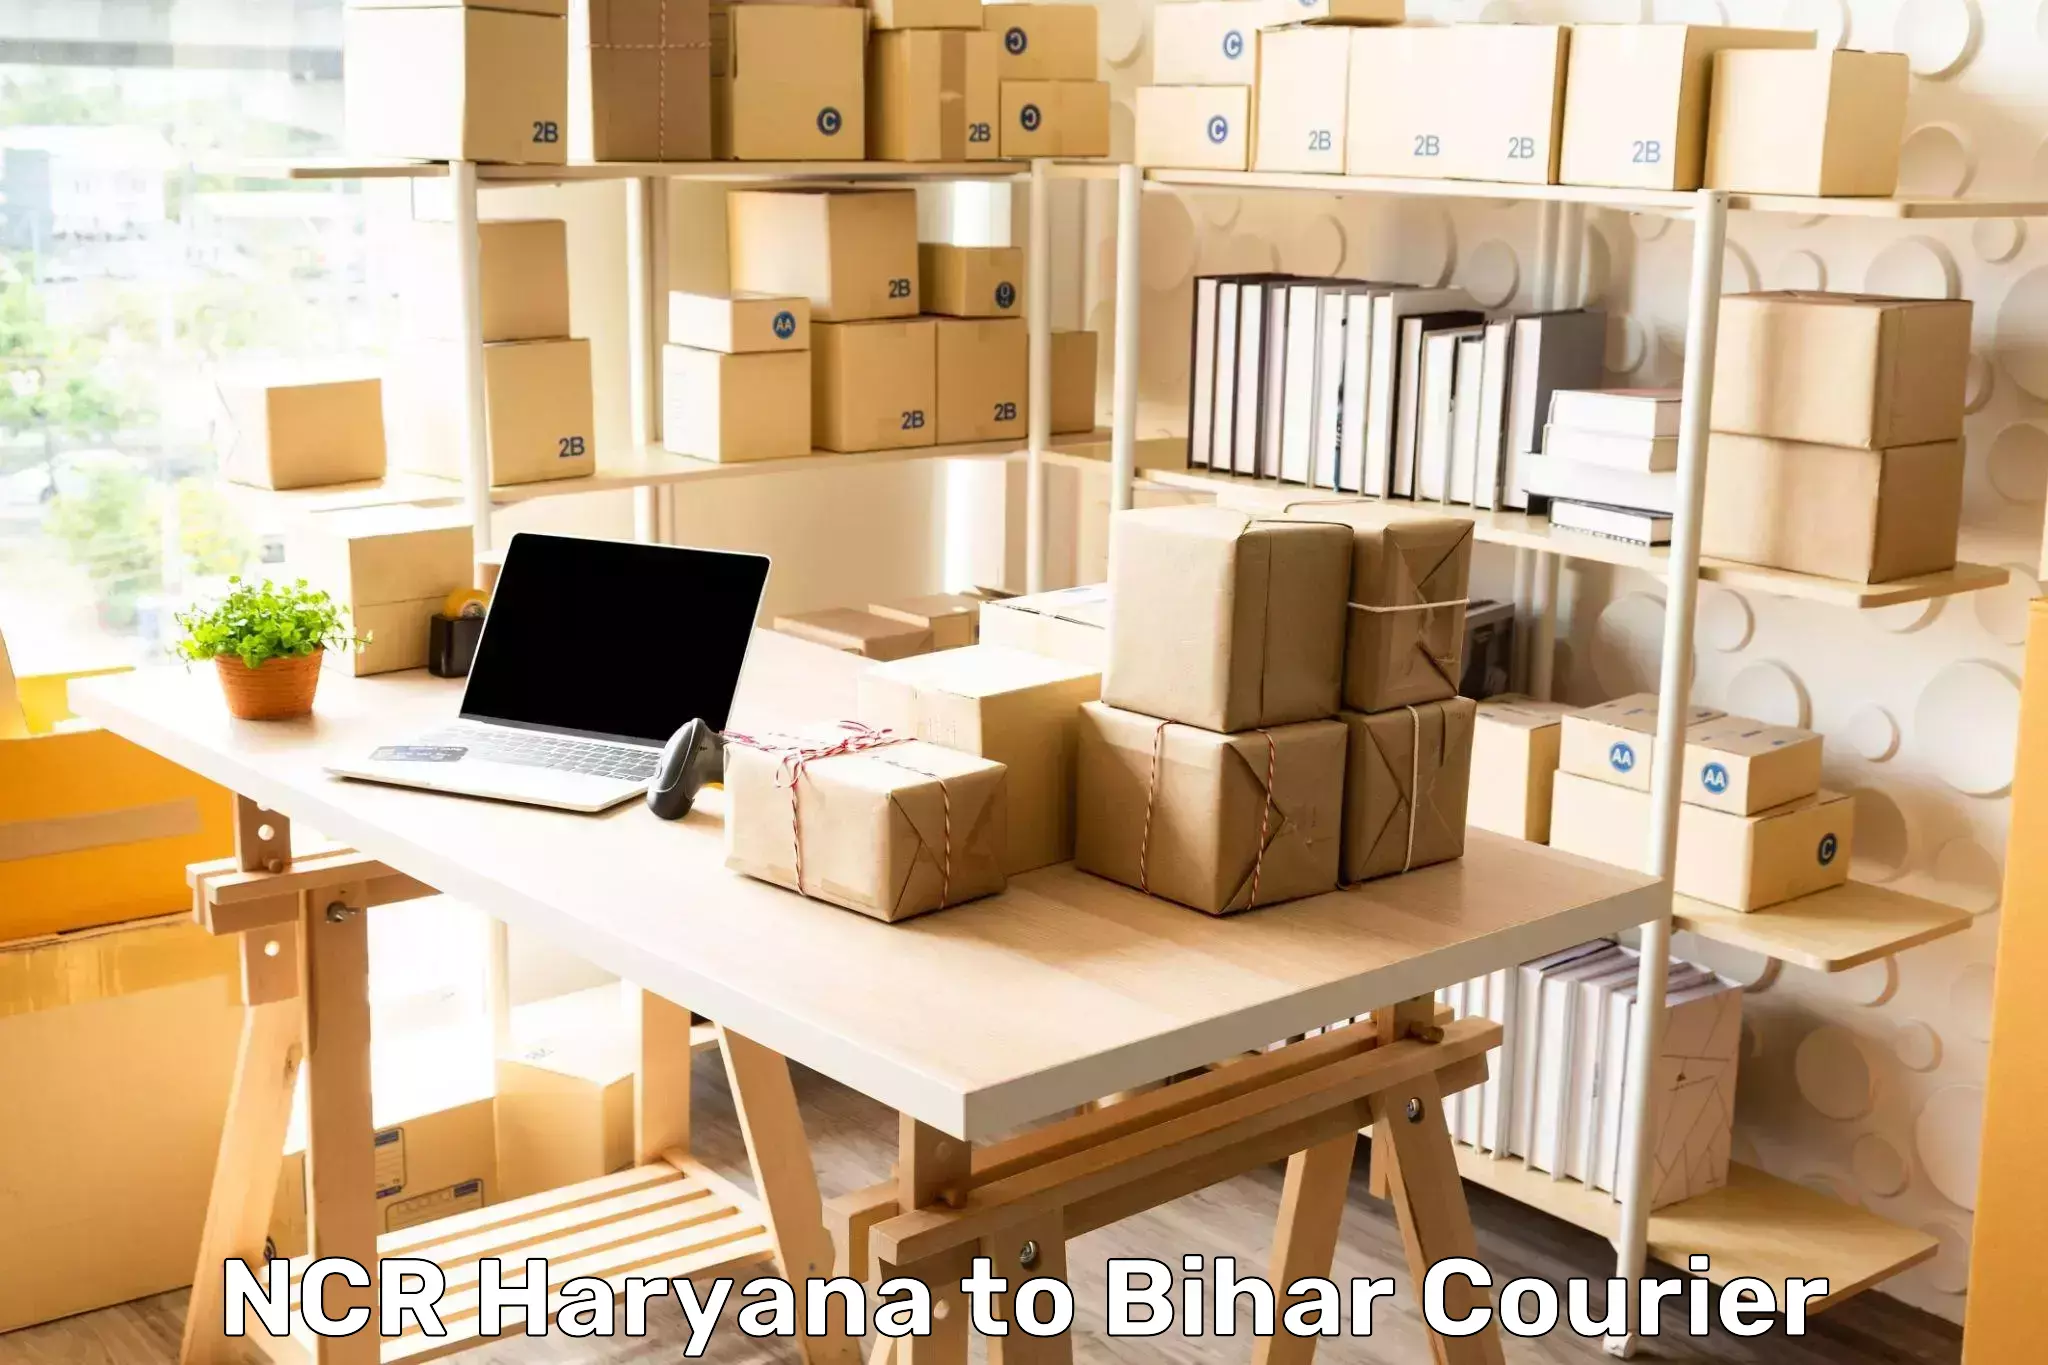 User-friendly delivery service NCR Haryana to Bharwara